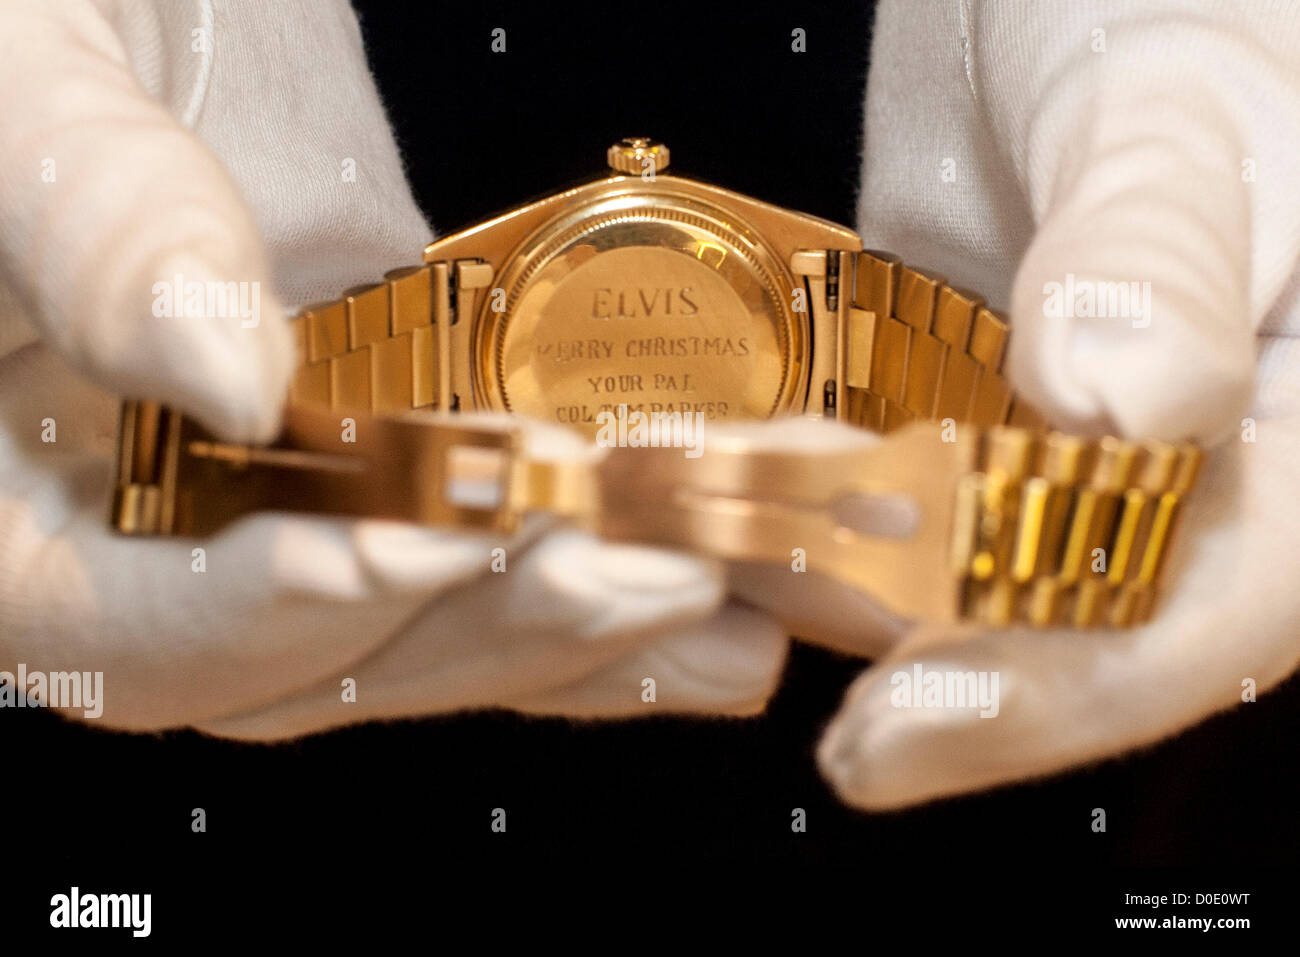 Auction at Christie's.  23/11/2012 , London, United Kingdom - Elvis Presley's  fine and rare 18ct. gold and diamond-set automatic calendar wristwatch with bracelet, by Rolex  Signed Rolex, Oyster Perpetual, Day Date, ref. 1803, case no. 5016633, manufactured in 1976     Credit:  Mario Mitsis / Alamy Live News. Stock Photo